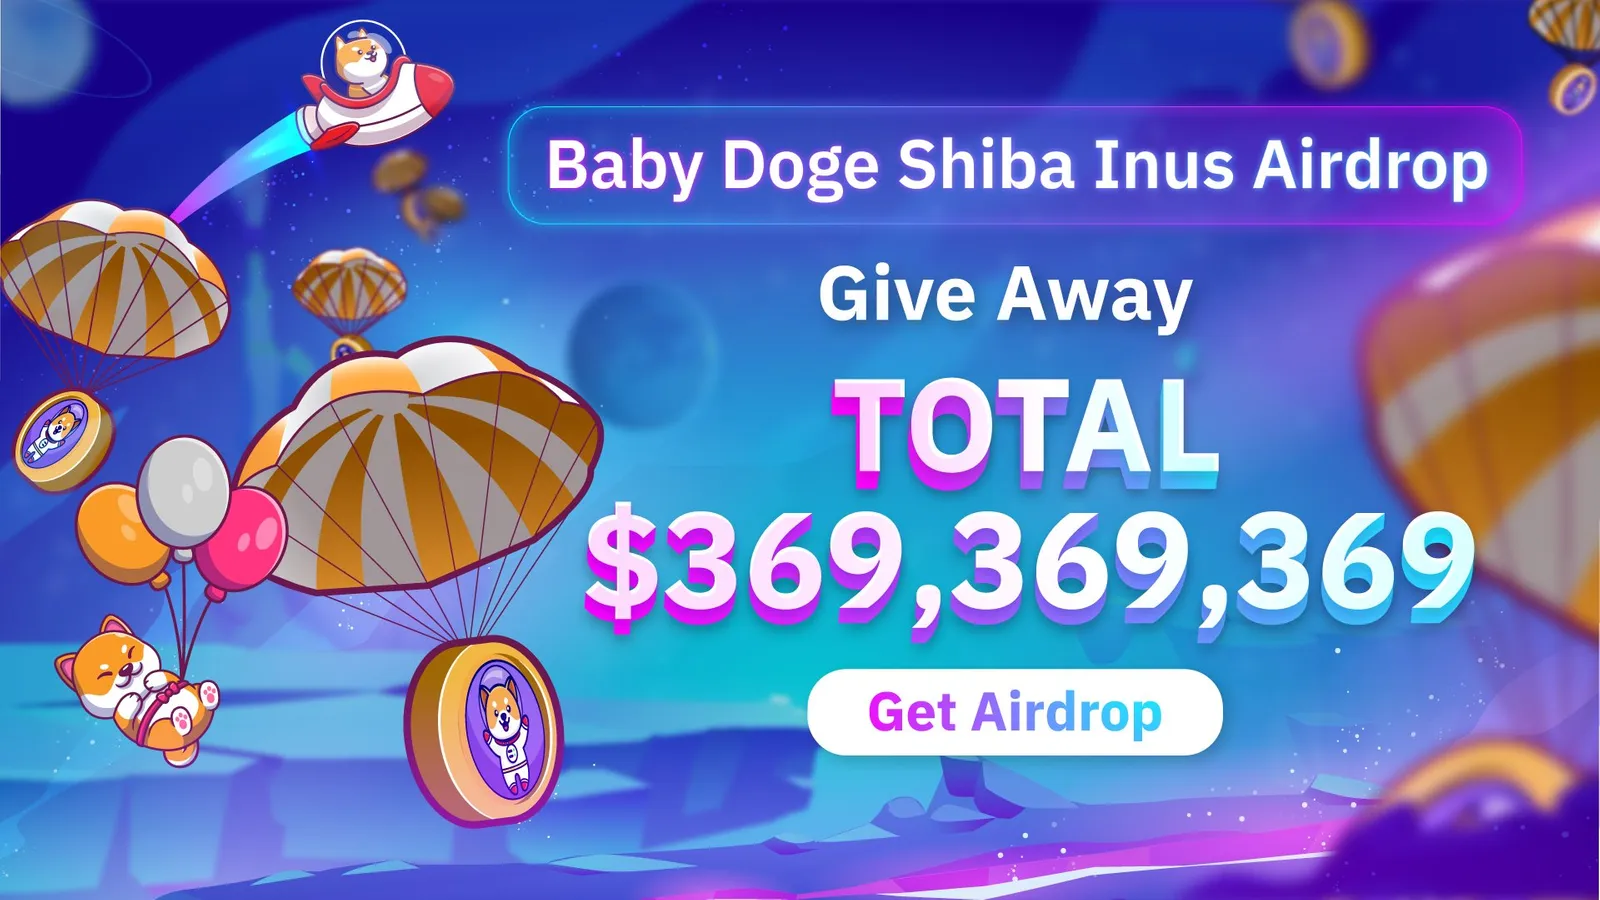 ANNOUNCEMENT: Baby Doge Shiba INUS is officially launched